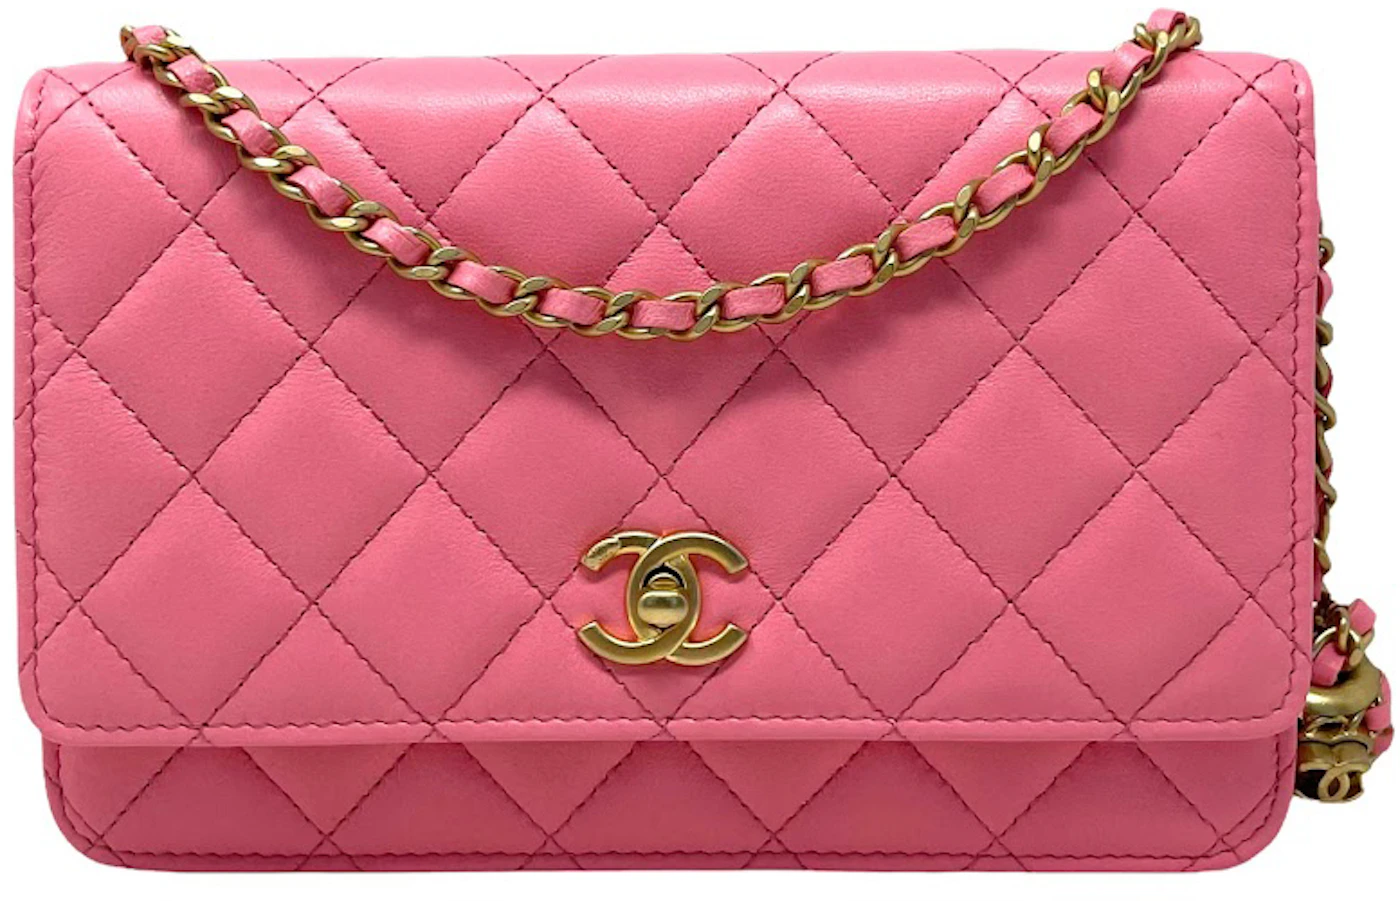 Timeless/classique leather crossbody bag Chanel Pink in Leather - 25261777